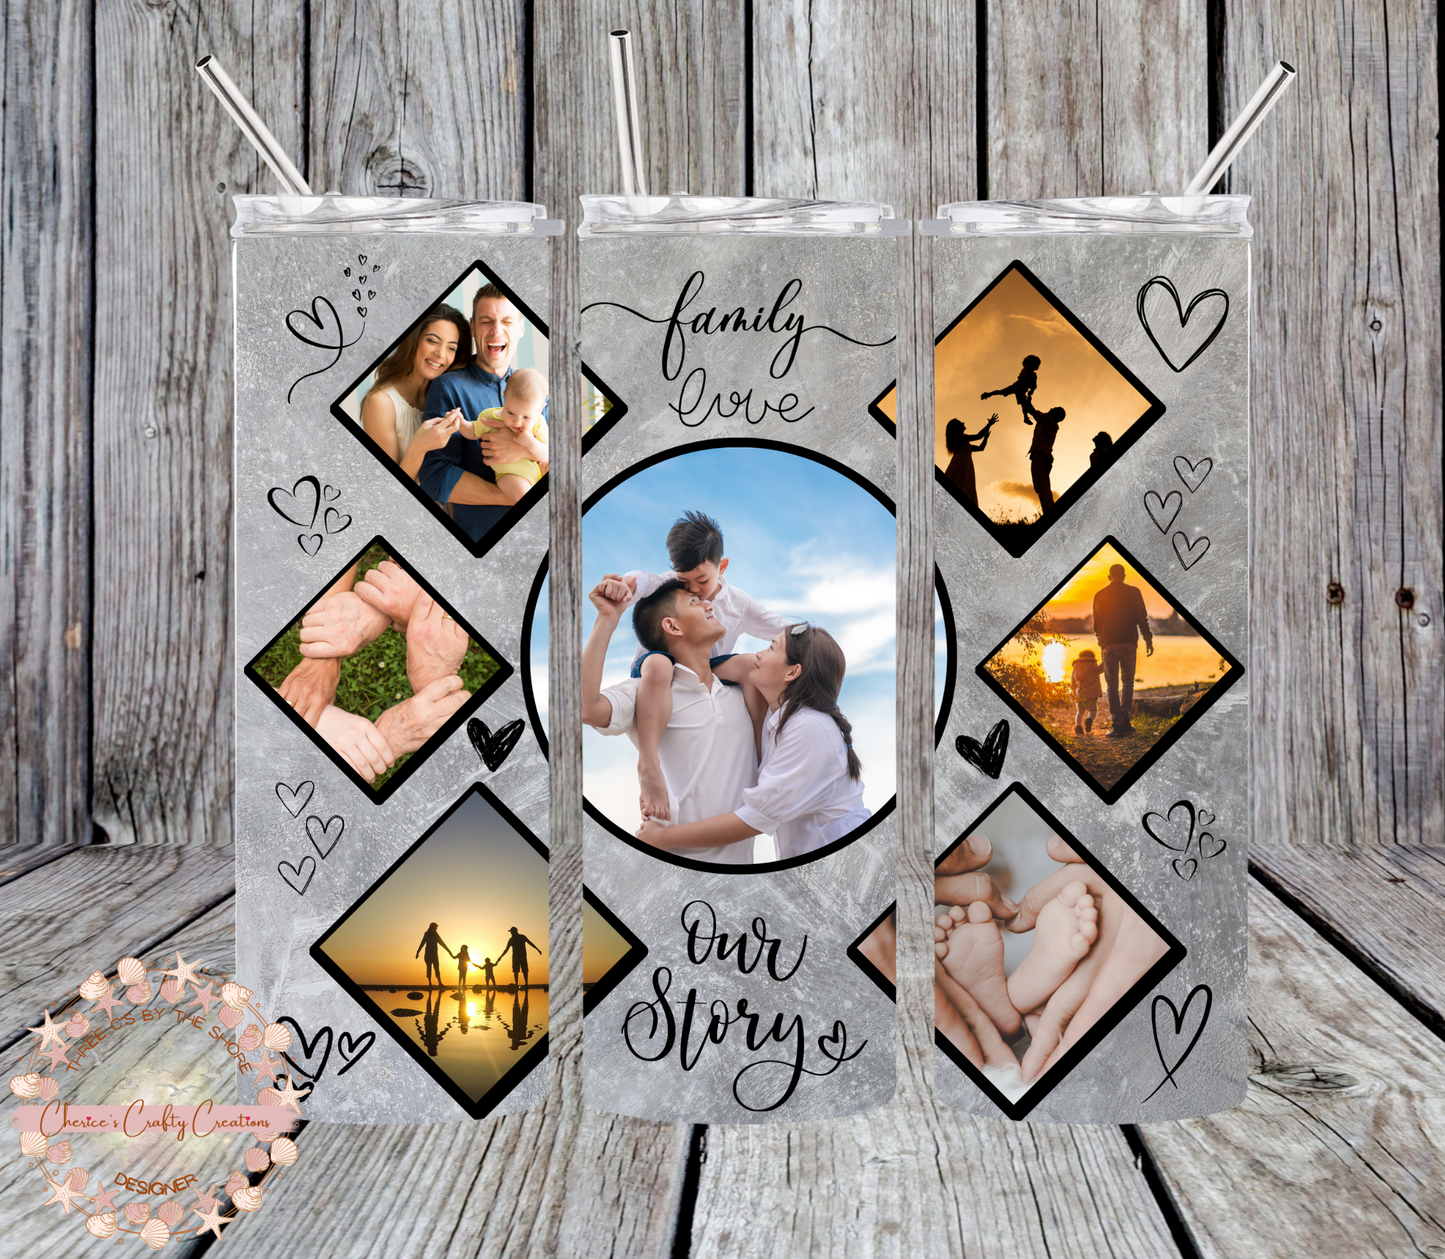 Personalize Family, Love, Our Story w/Photos